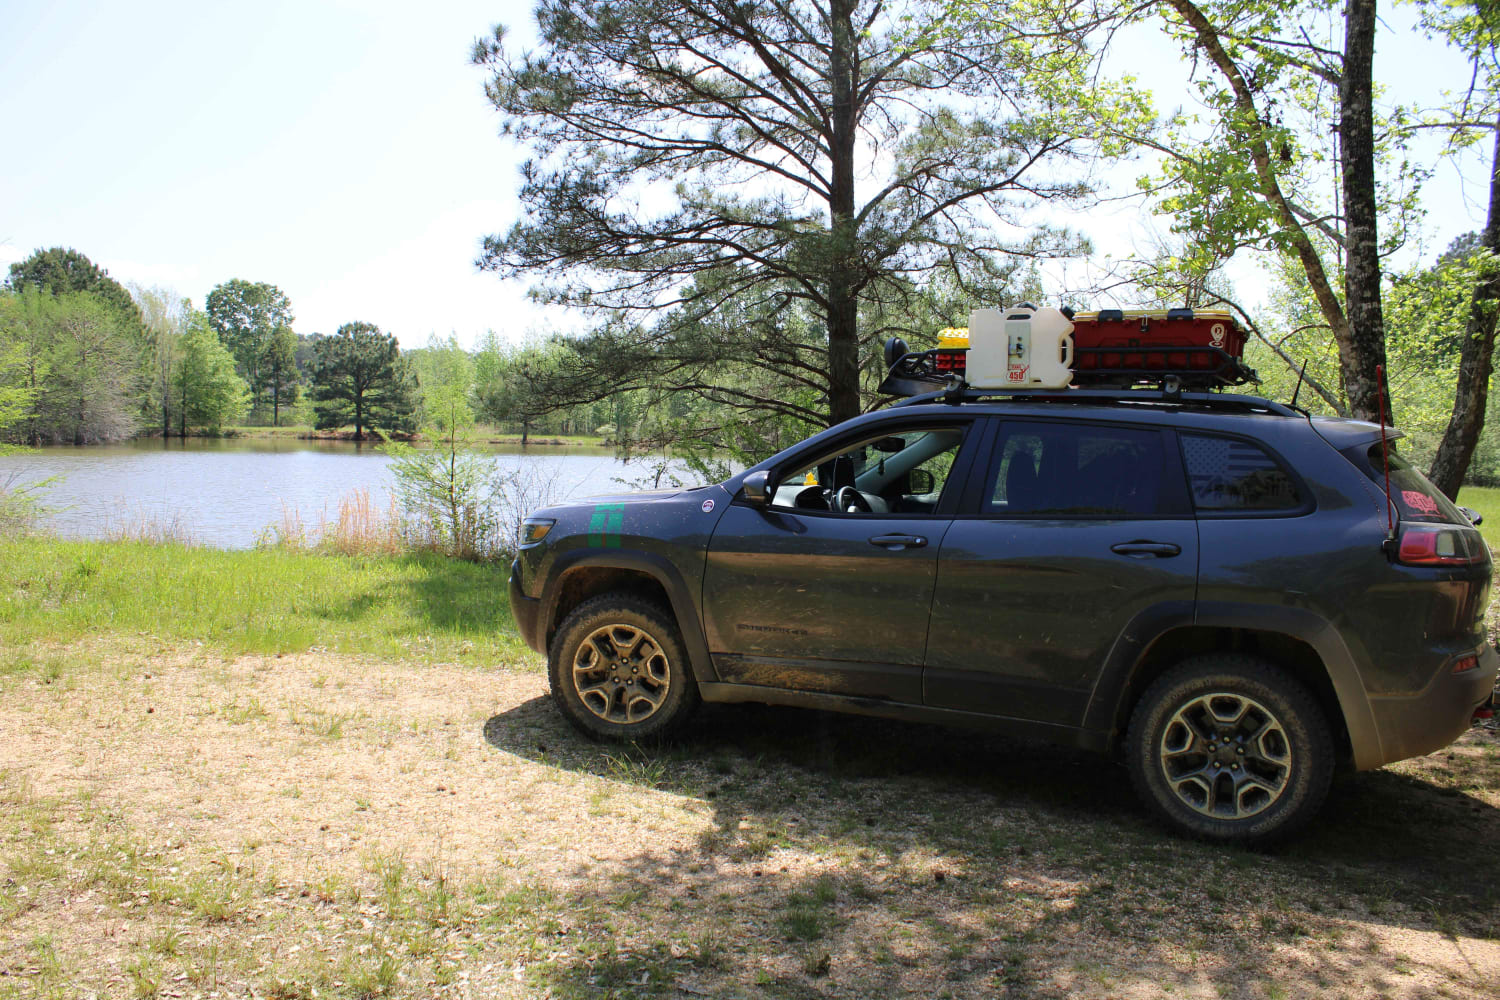 The Arkansas Overland Route - TrailHawk Loop - Section 16